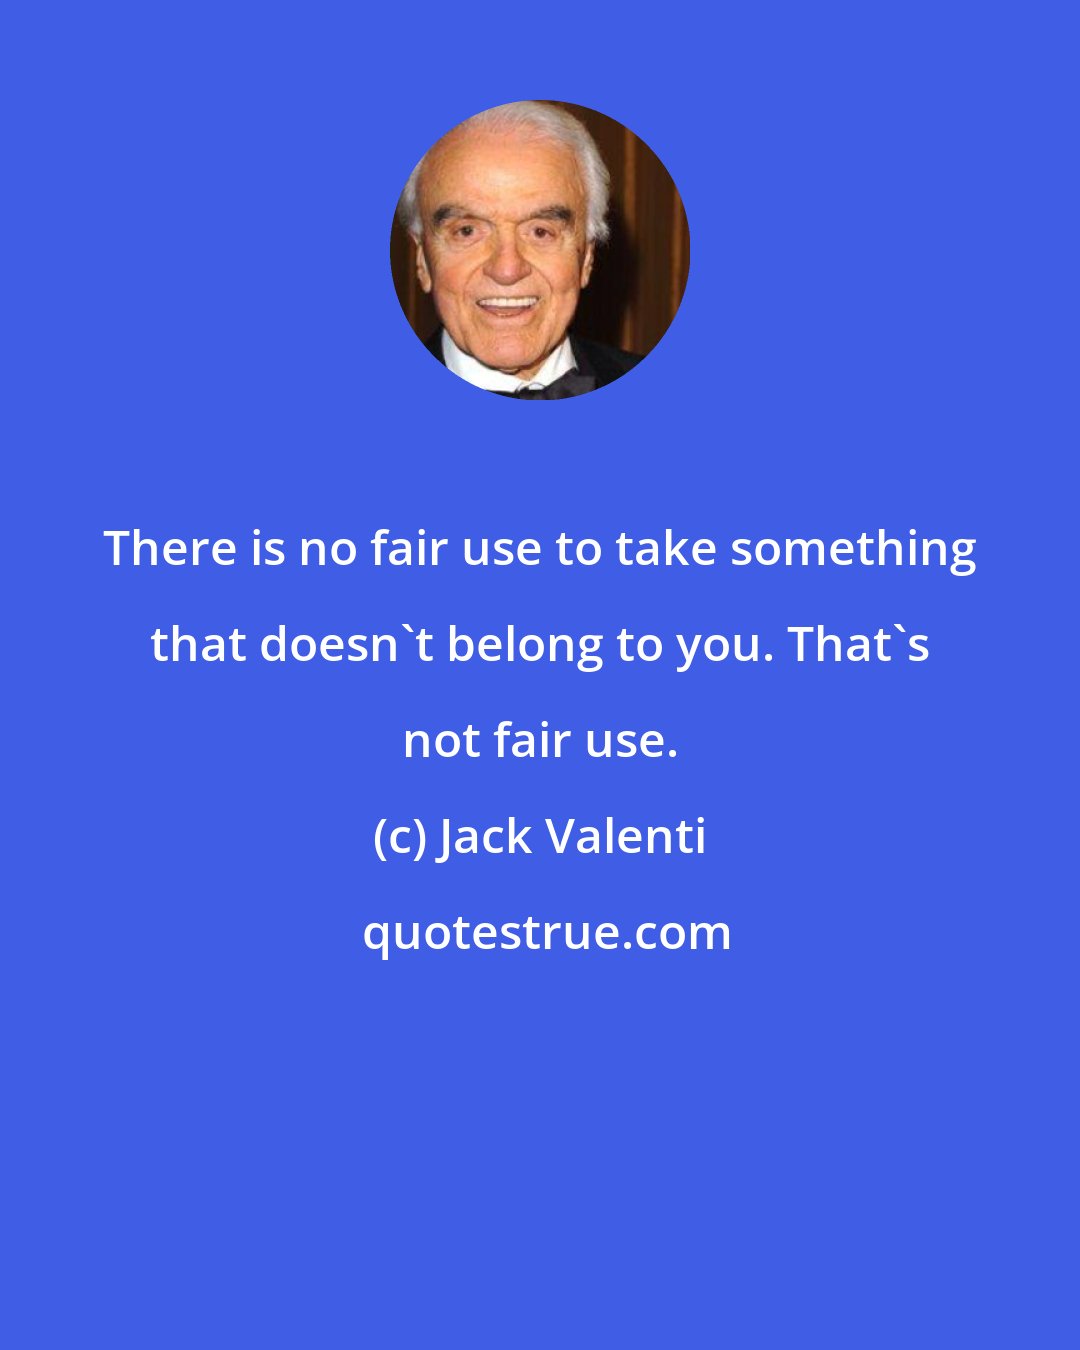 Jack Valenti: There is no fair use to take something that doesn't belong to you. That's not fair use.